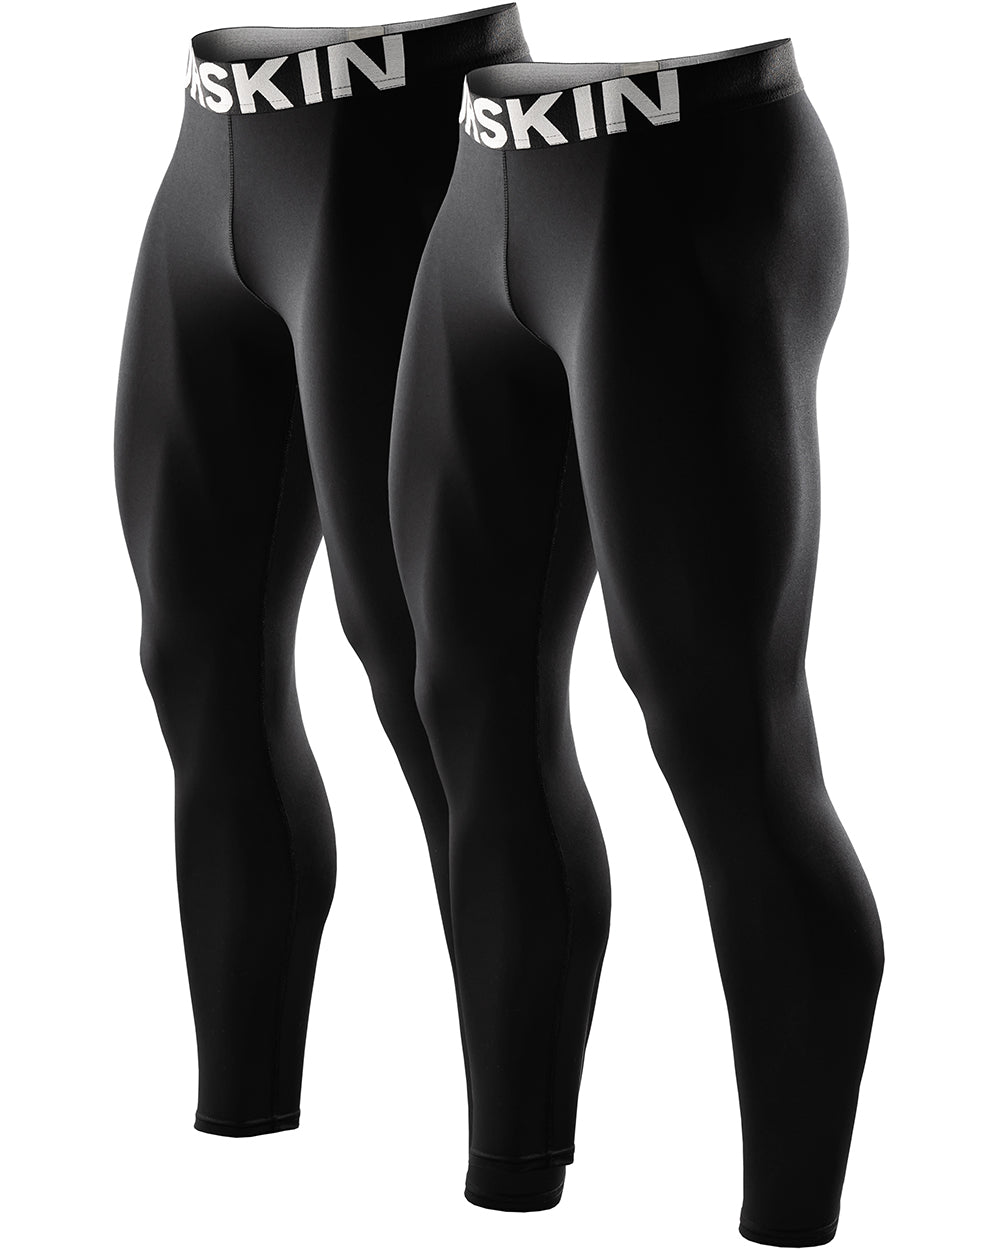 https://drskinsports.com/cdn/shop/products/powergear-dry-fit-standard-compression-pants-2pack-368149.jpg?v=1702343500